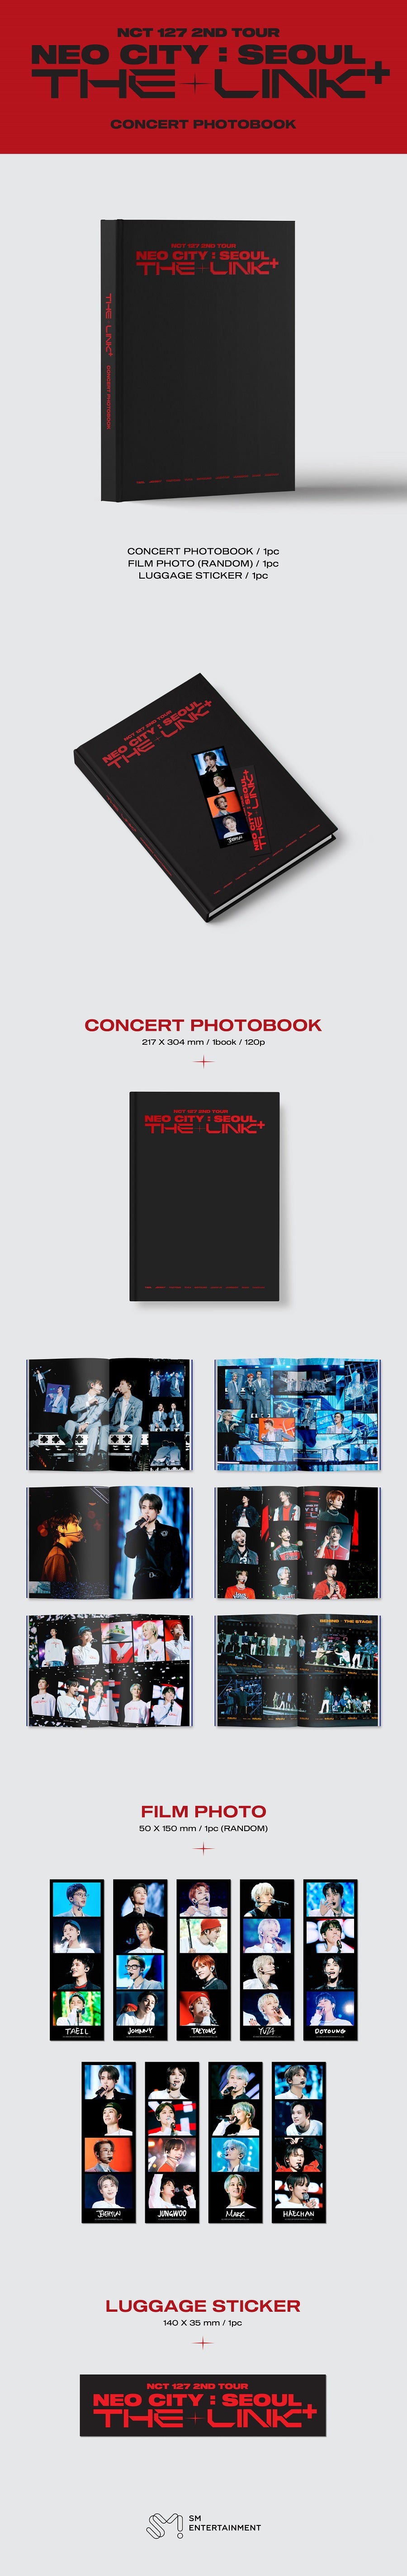 NCT 127 - 2ND TOUR 'NEO CITY SEOUL - THE LINK' PHOTOBOOK